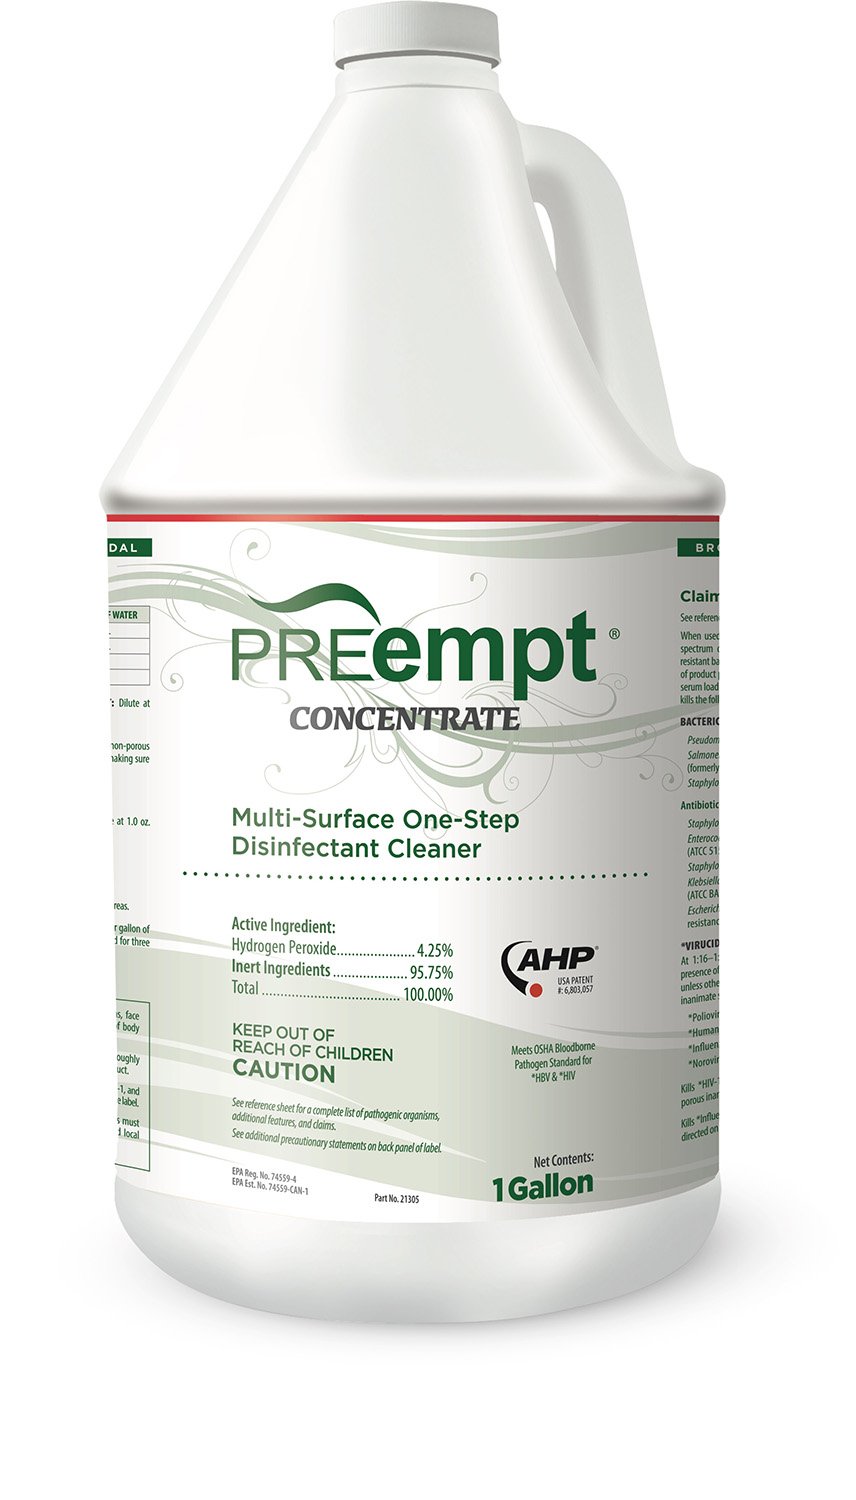 PREempt Concentrate Disinfectant-1